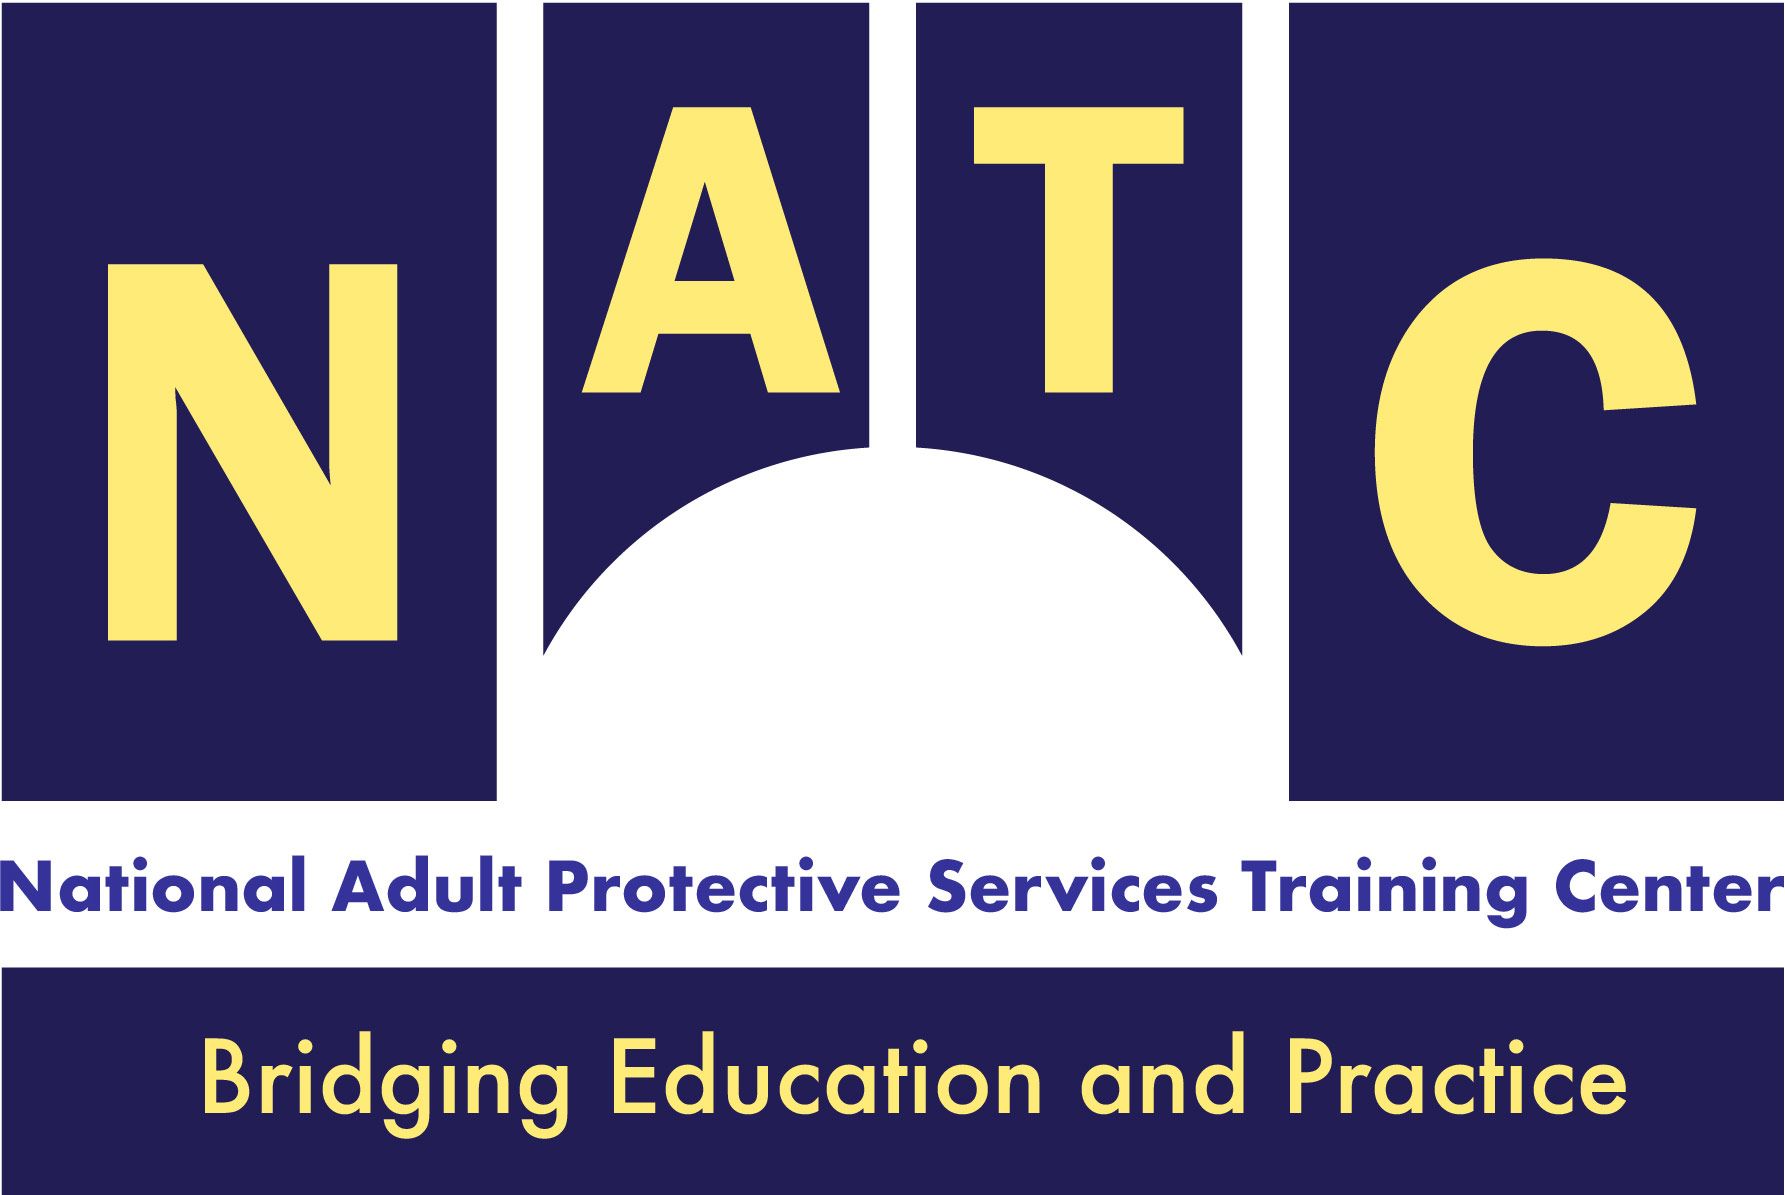 National Adult Protective Services Training Center